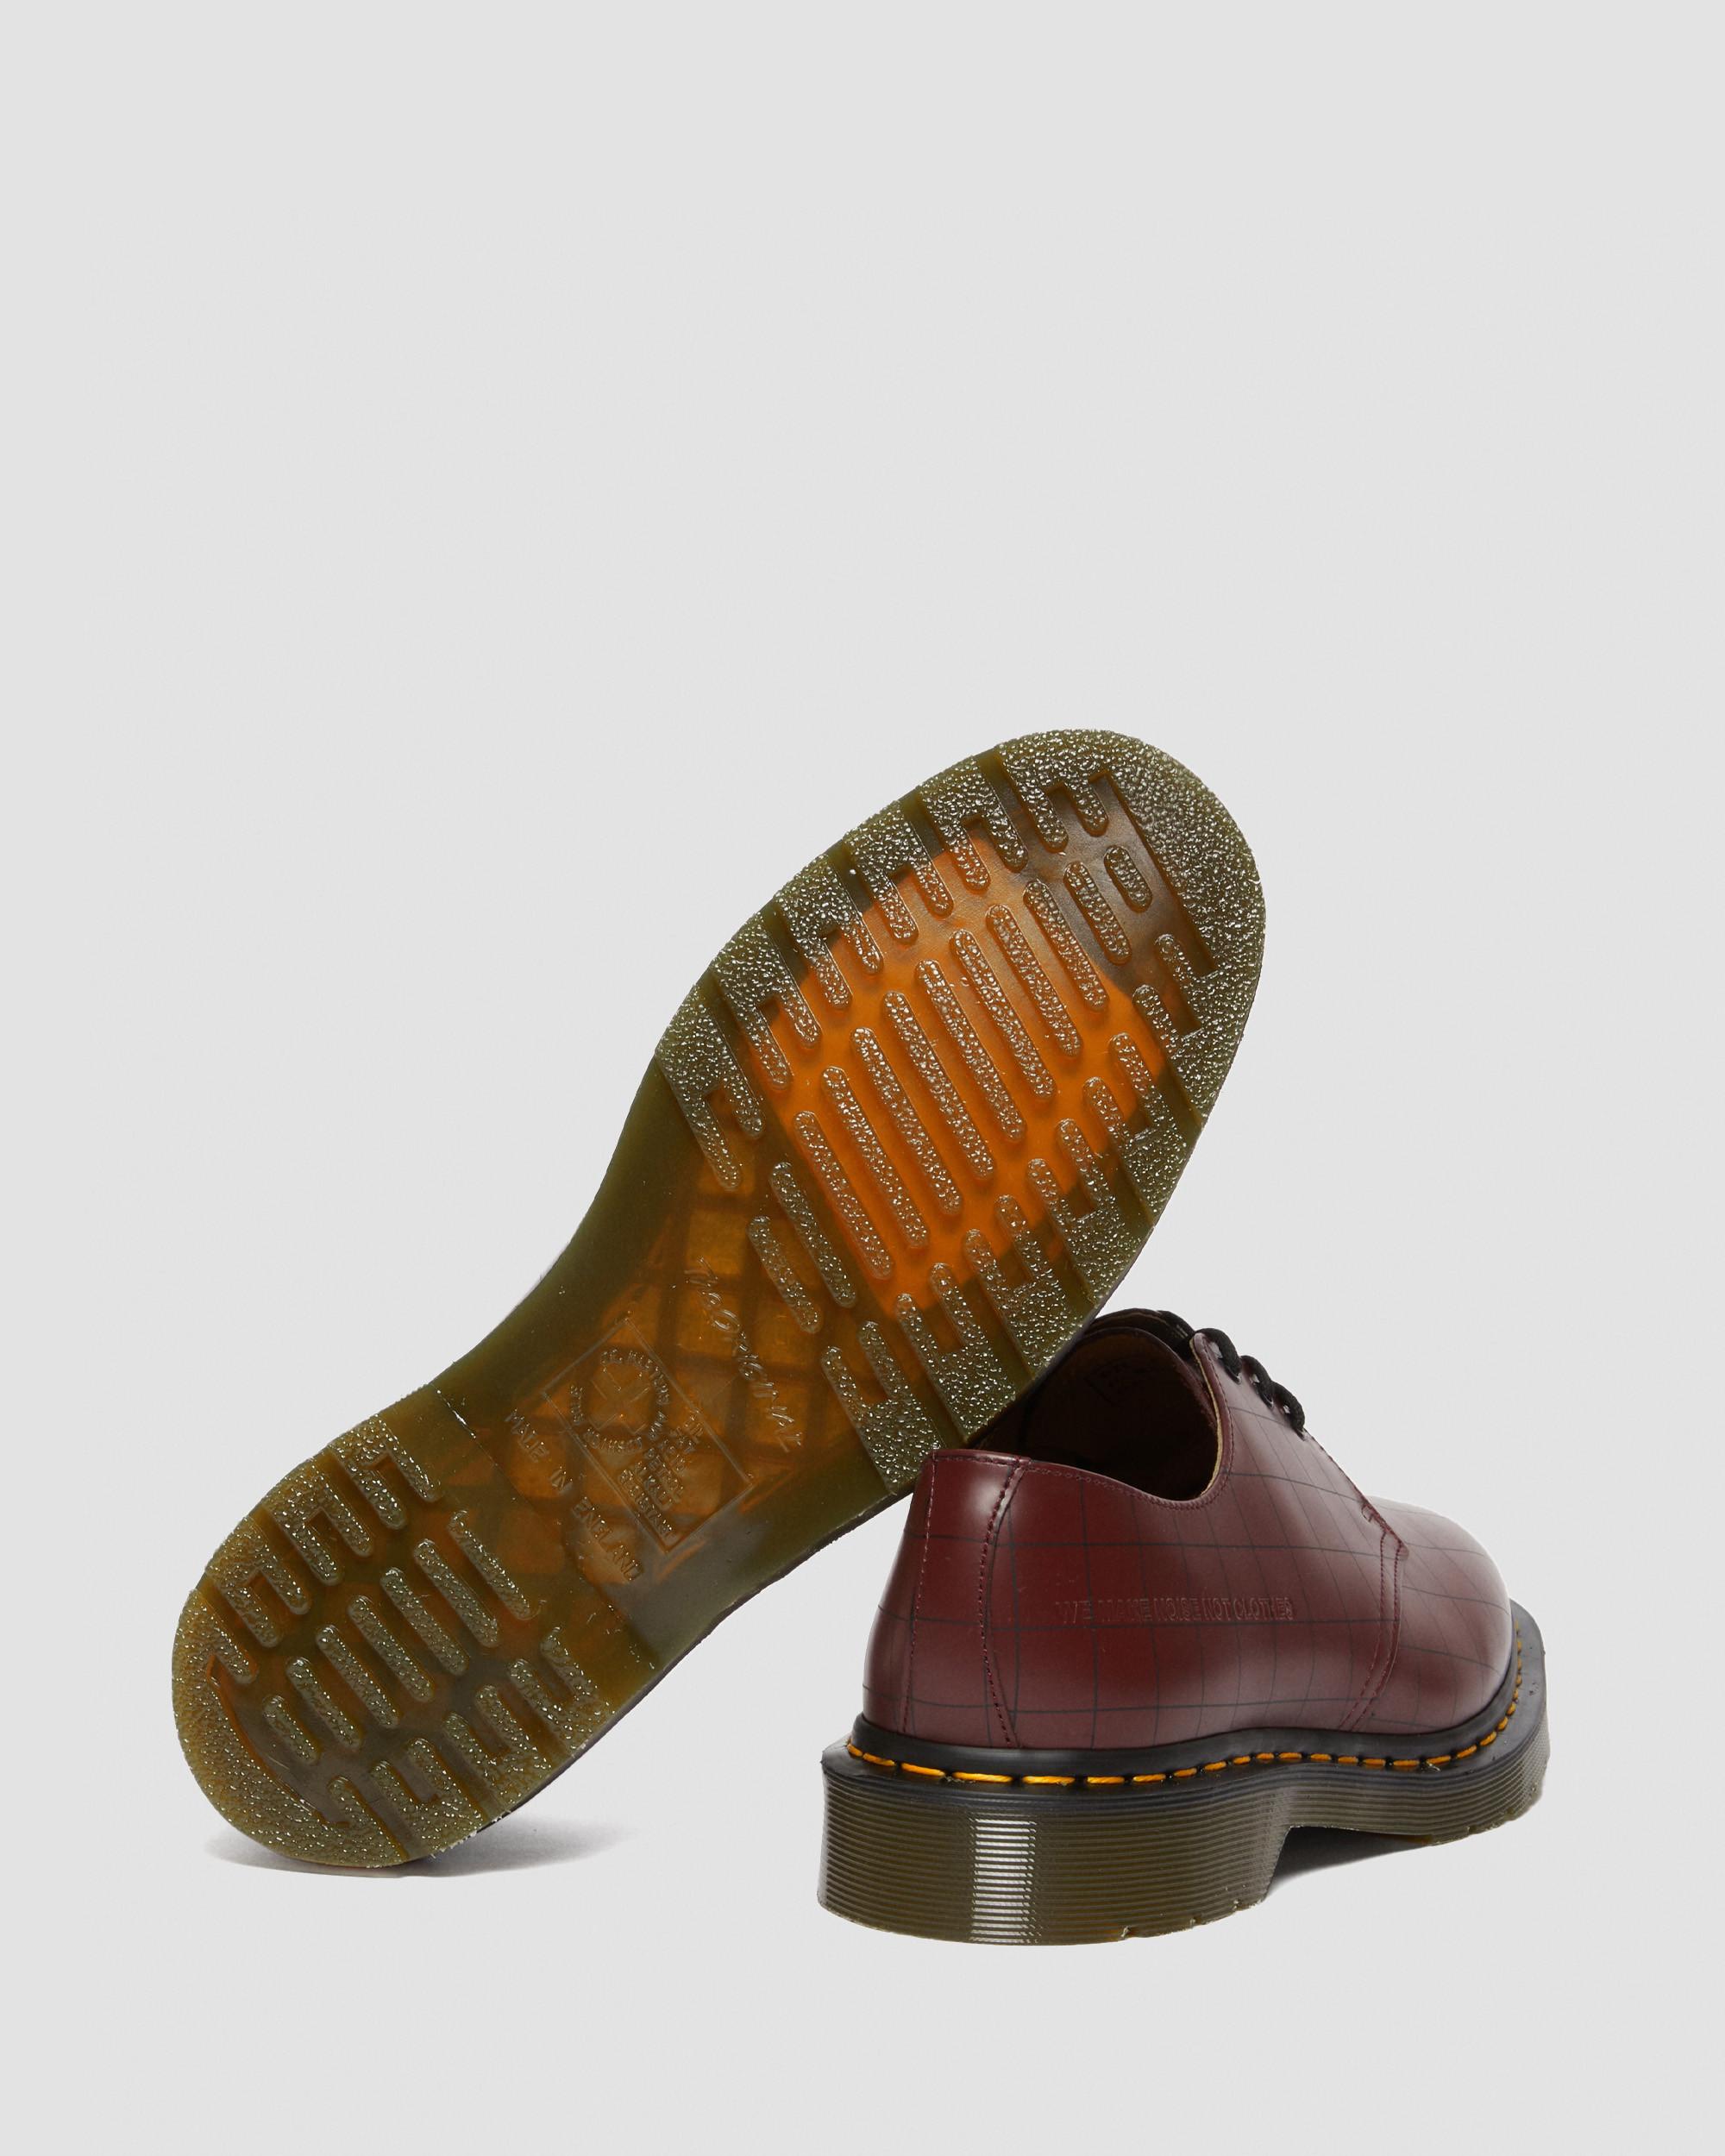 Chaussures 1461 Undercover en cuir SmoothChaussures 1461 Undercover en cuir Smooth Dr. Martens